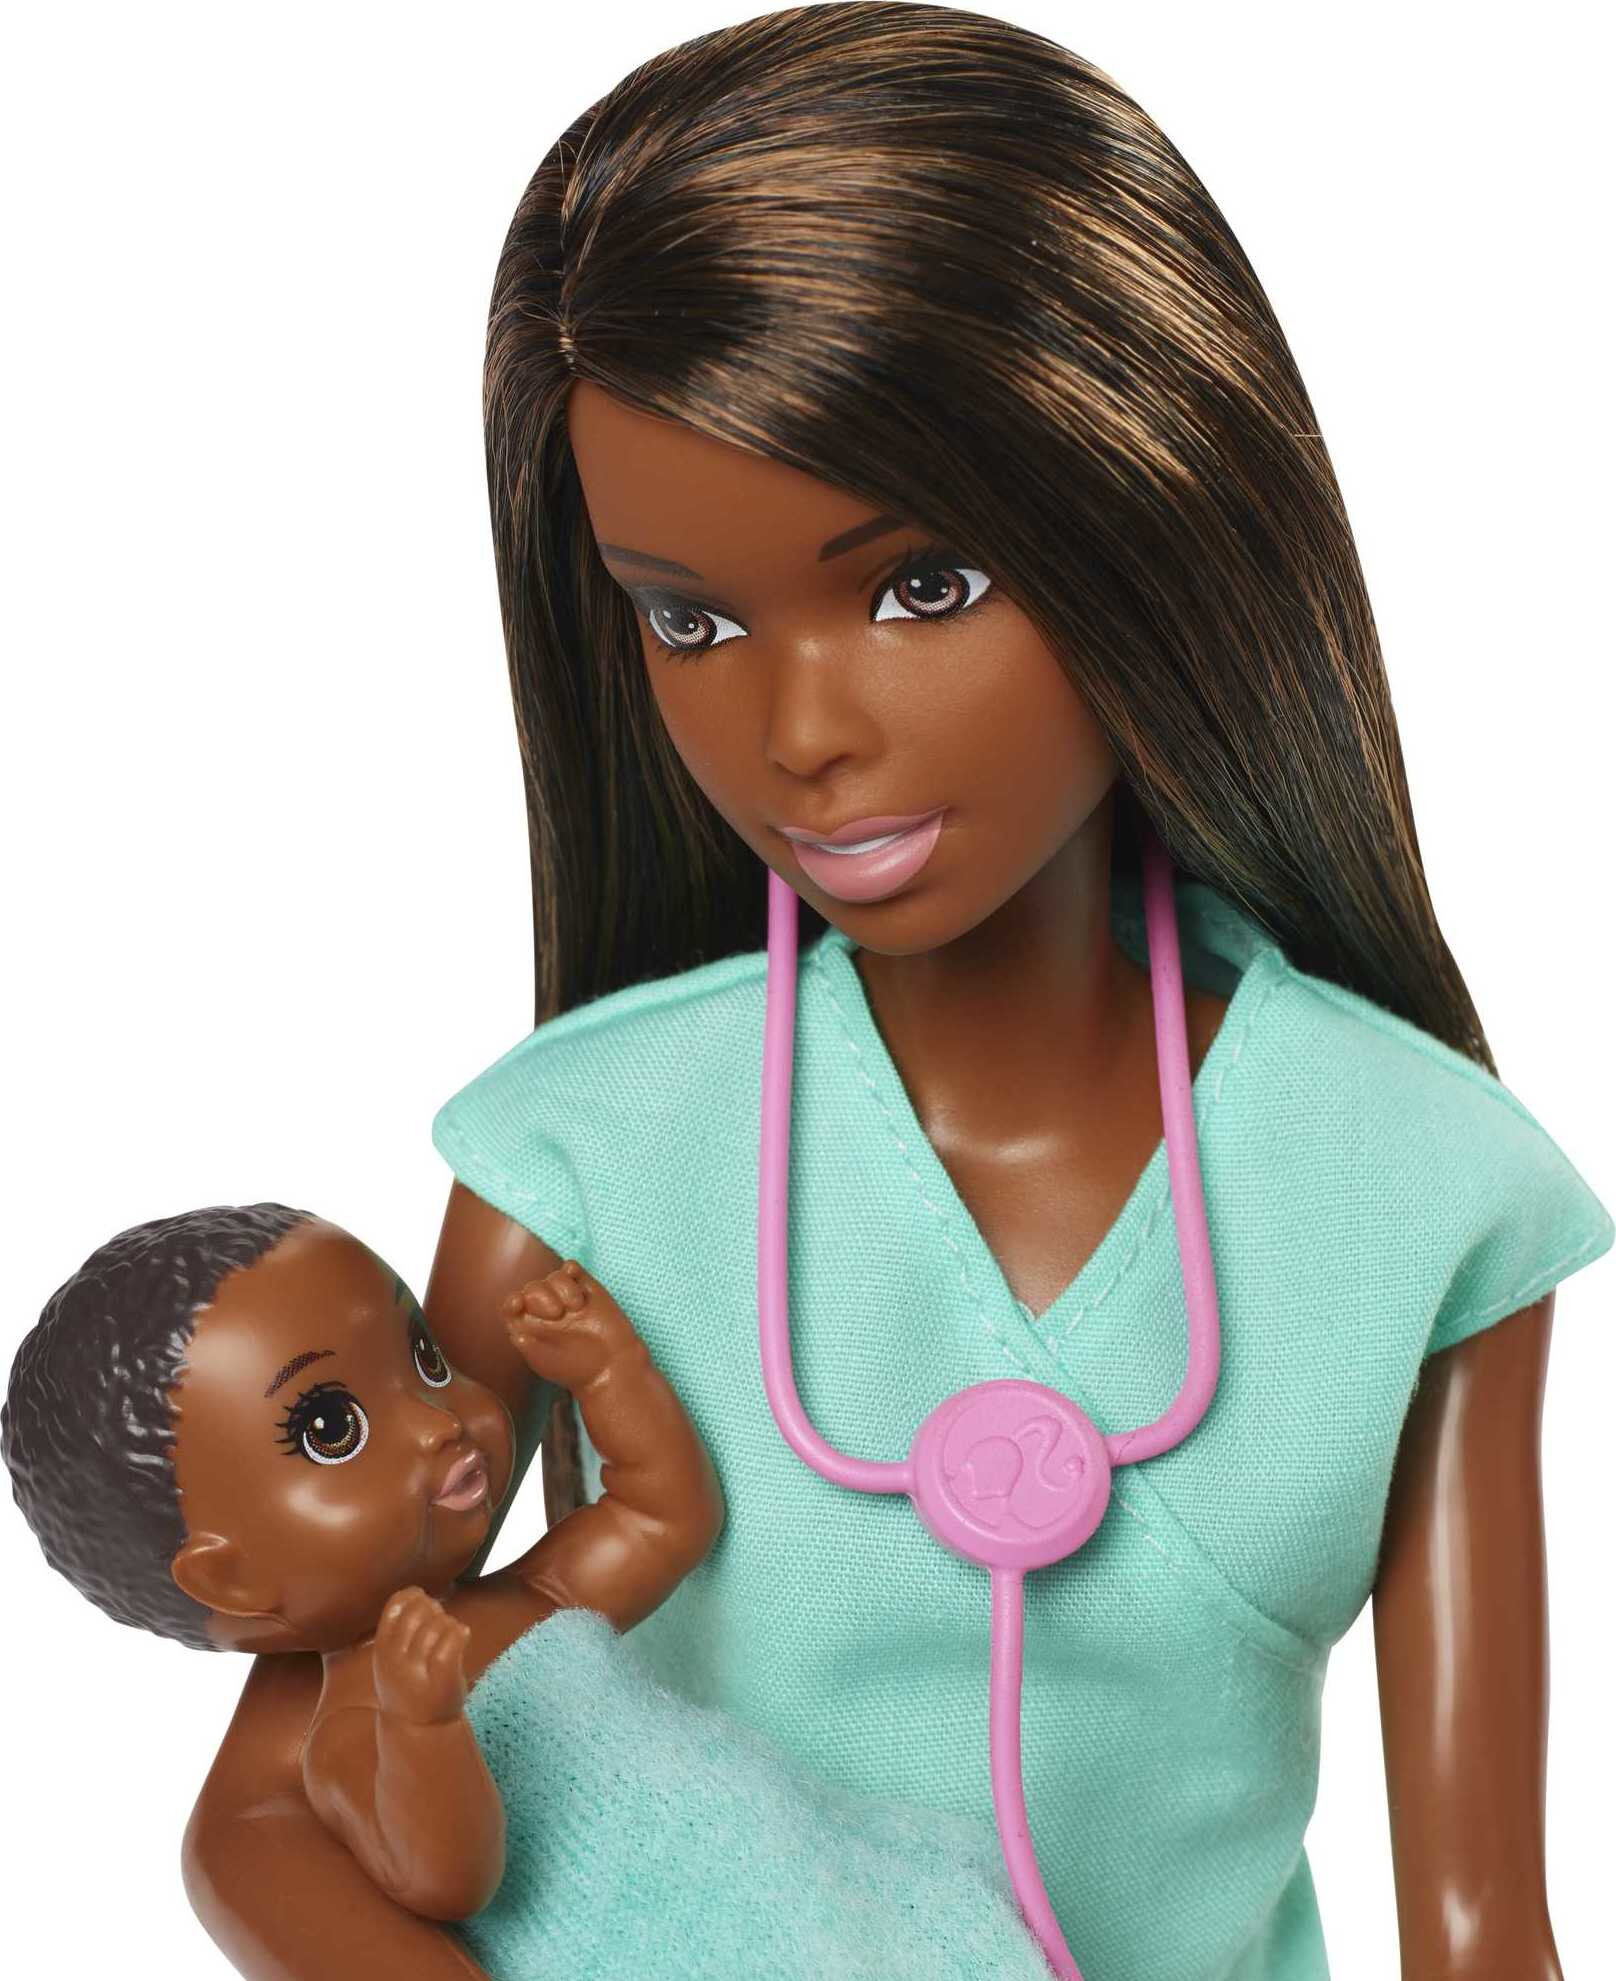 Barbie Careers Baby Doctor Playset with Brunette Fashion Doll, 2 Baby Dolls, Furniture & Accessories - image 3 of 6